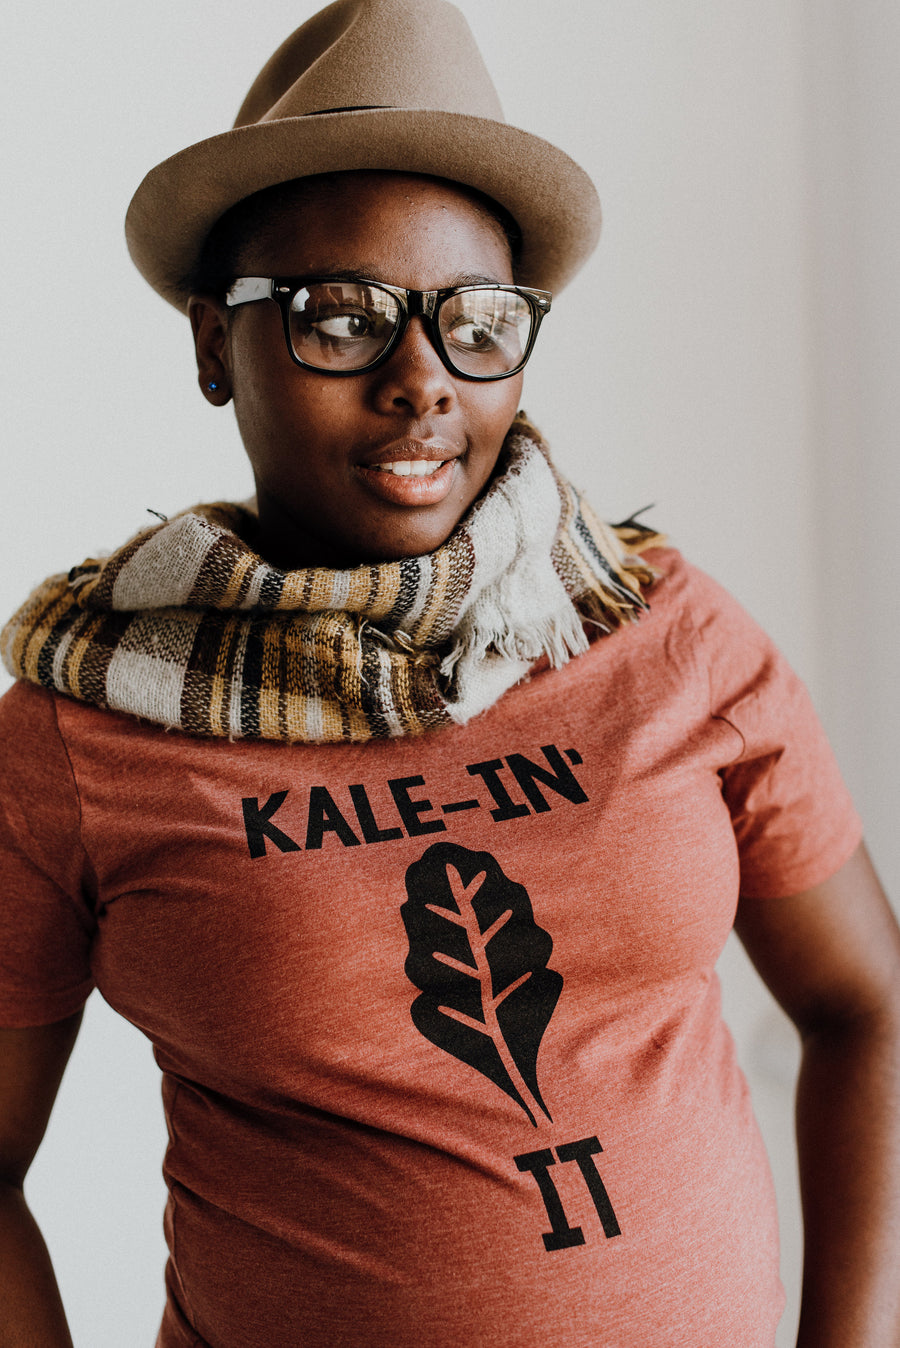 Kale-In It (Heather Clay T-shirt)